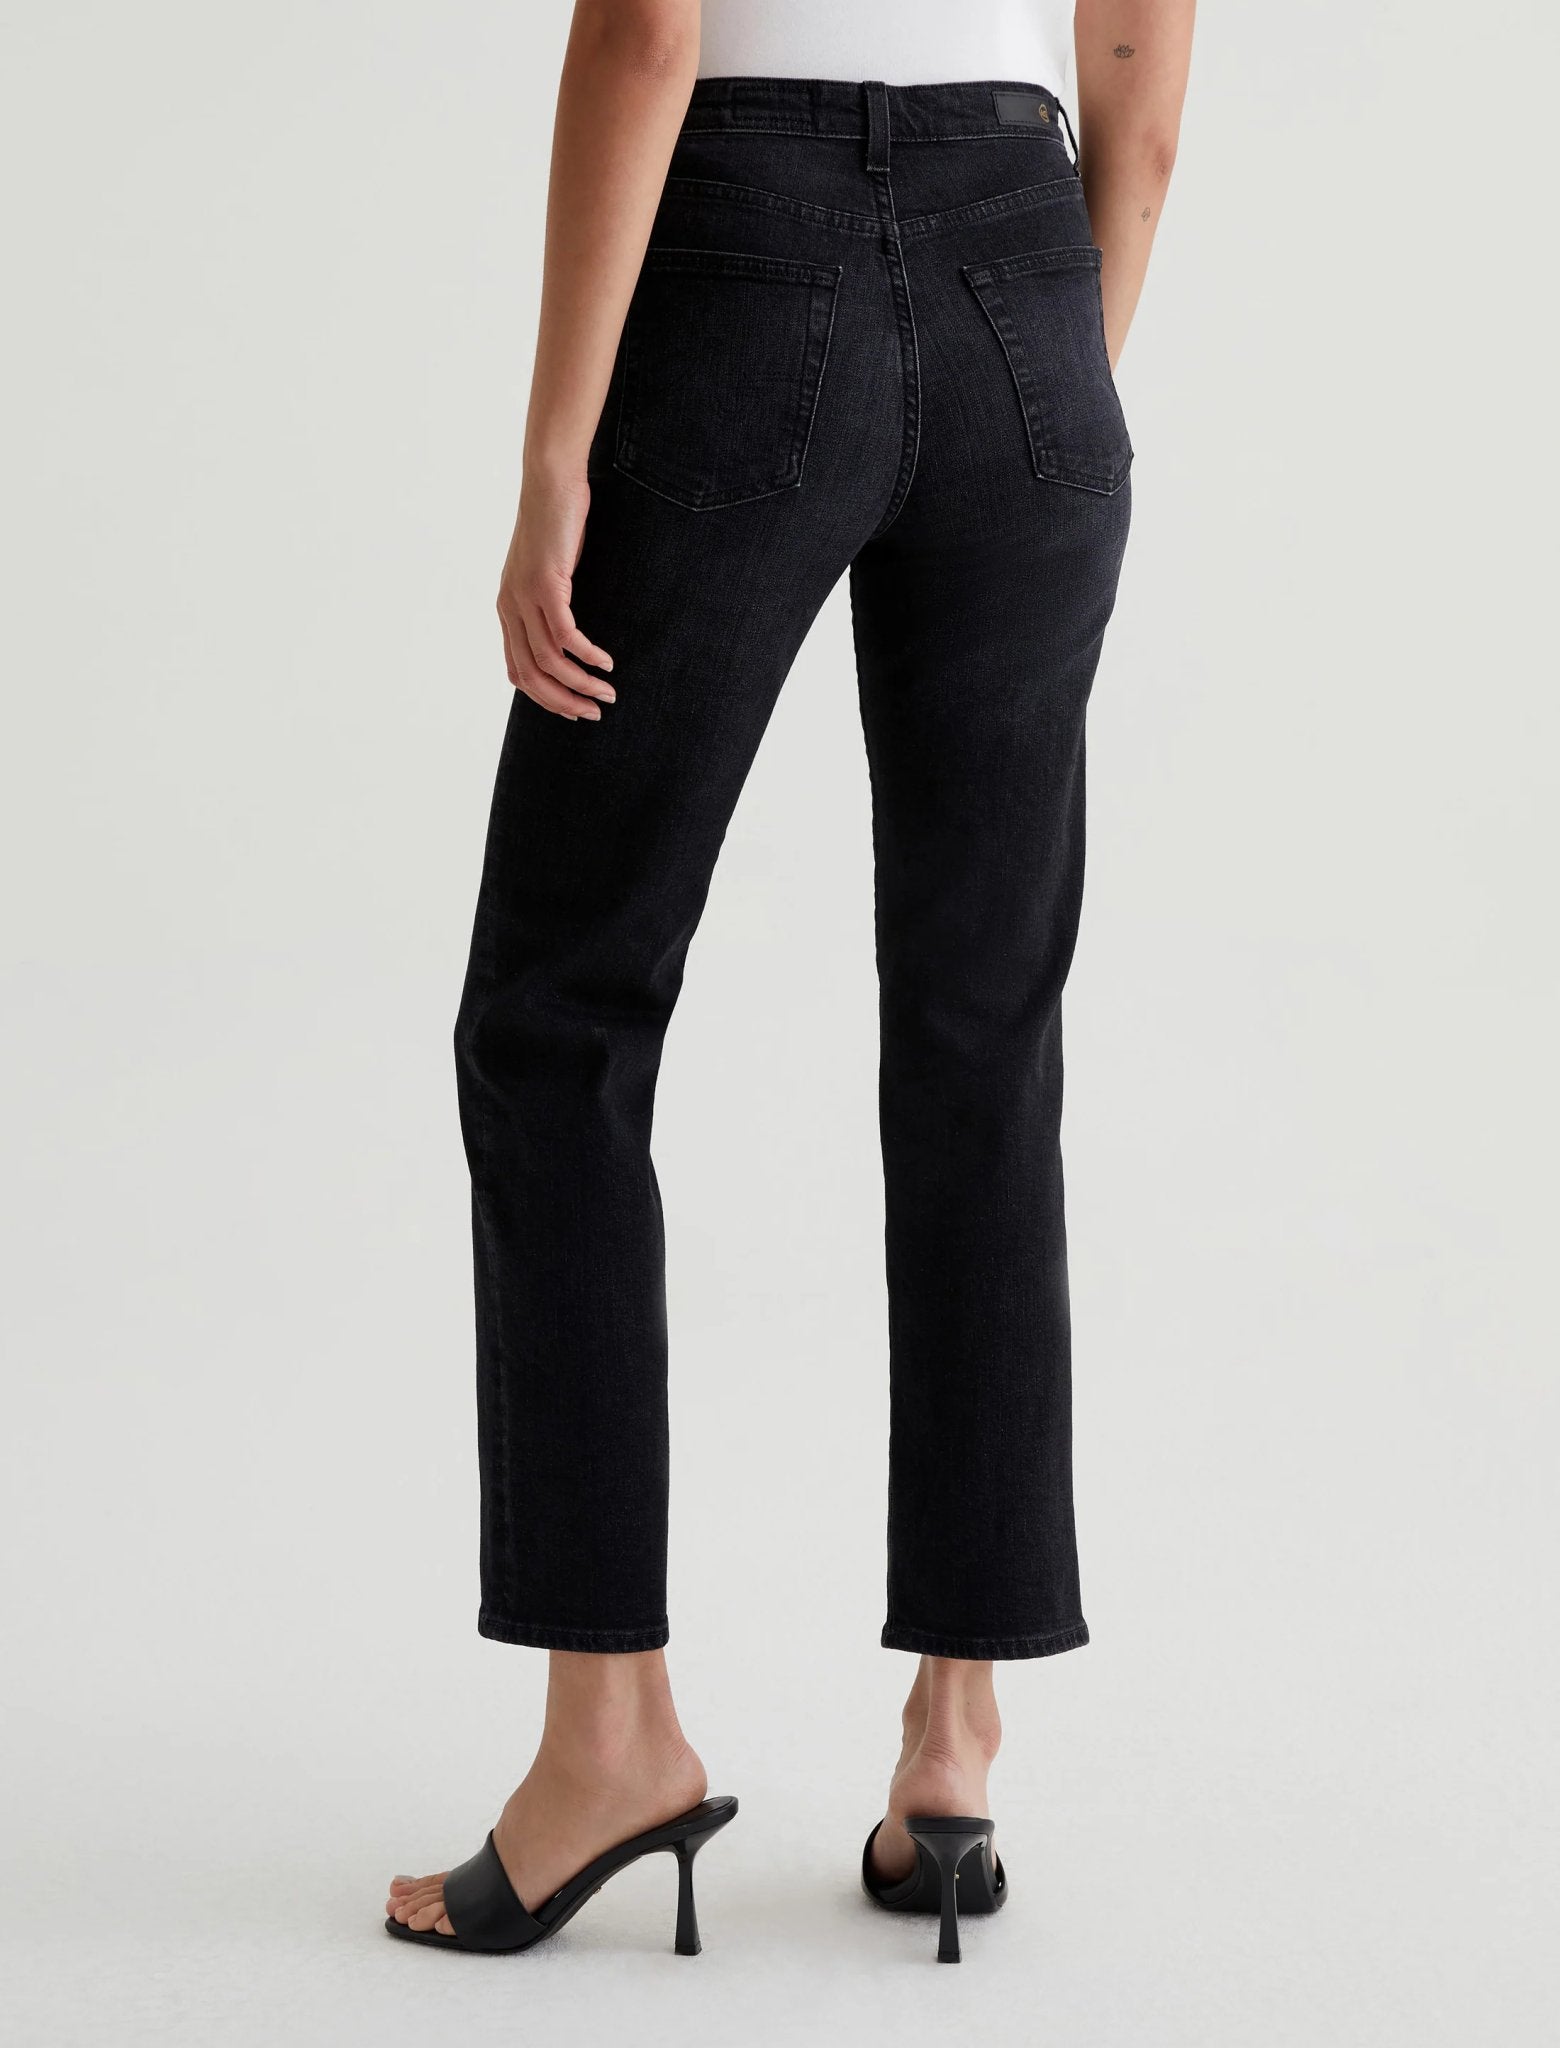 Saige High Rise Straight Jeans - AG Jeans - Danali - STS1A99-COSM-26